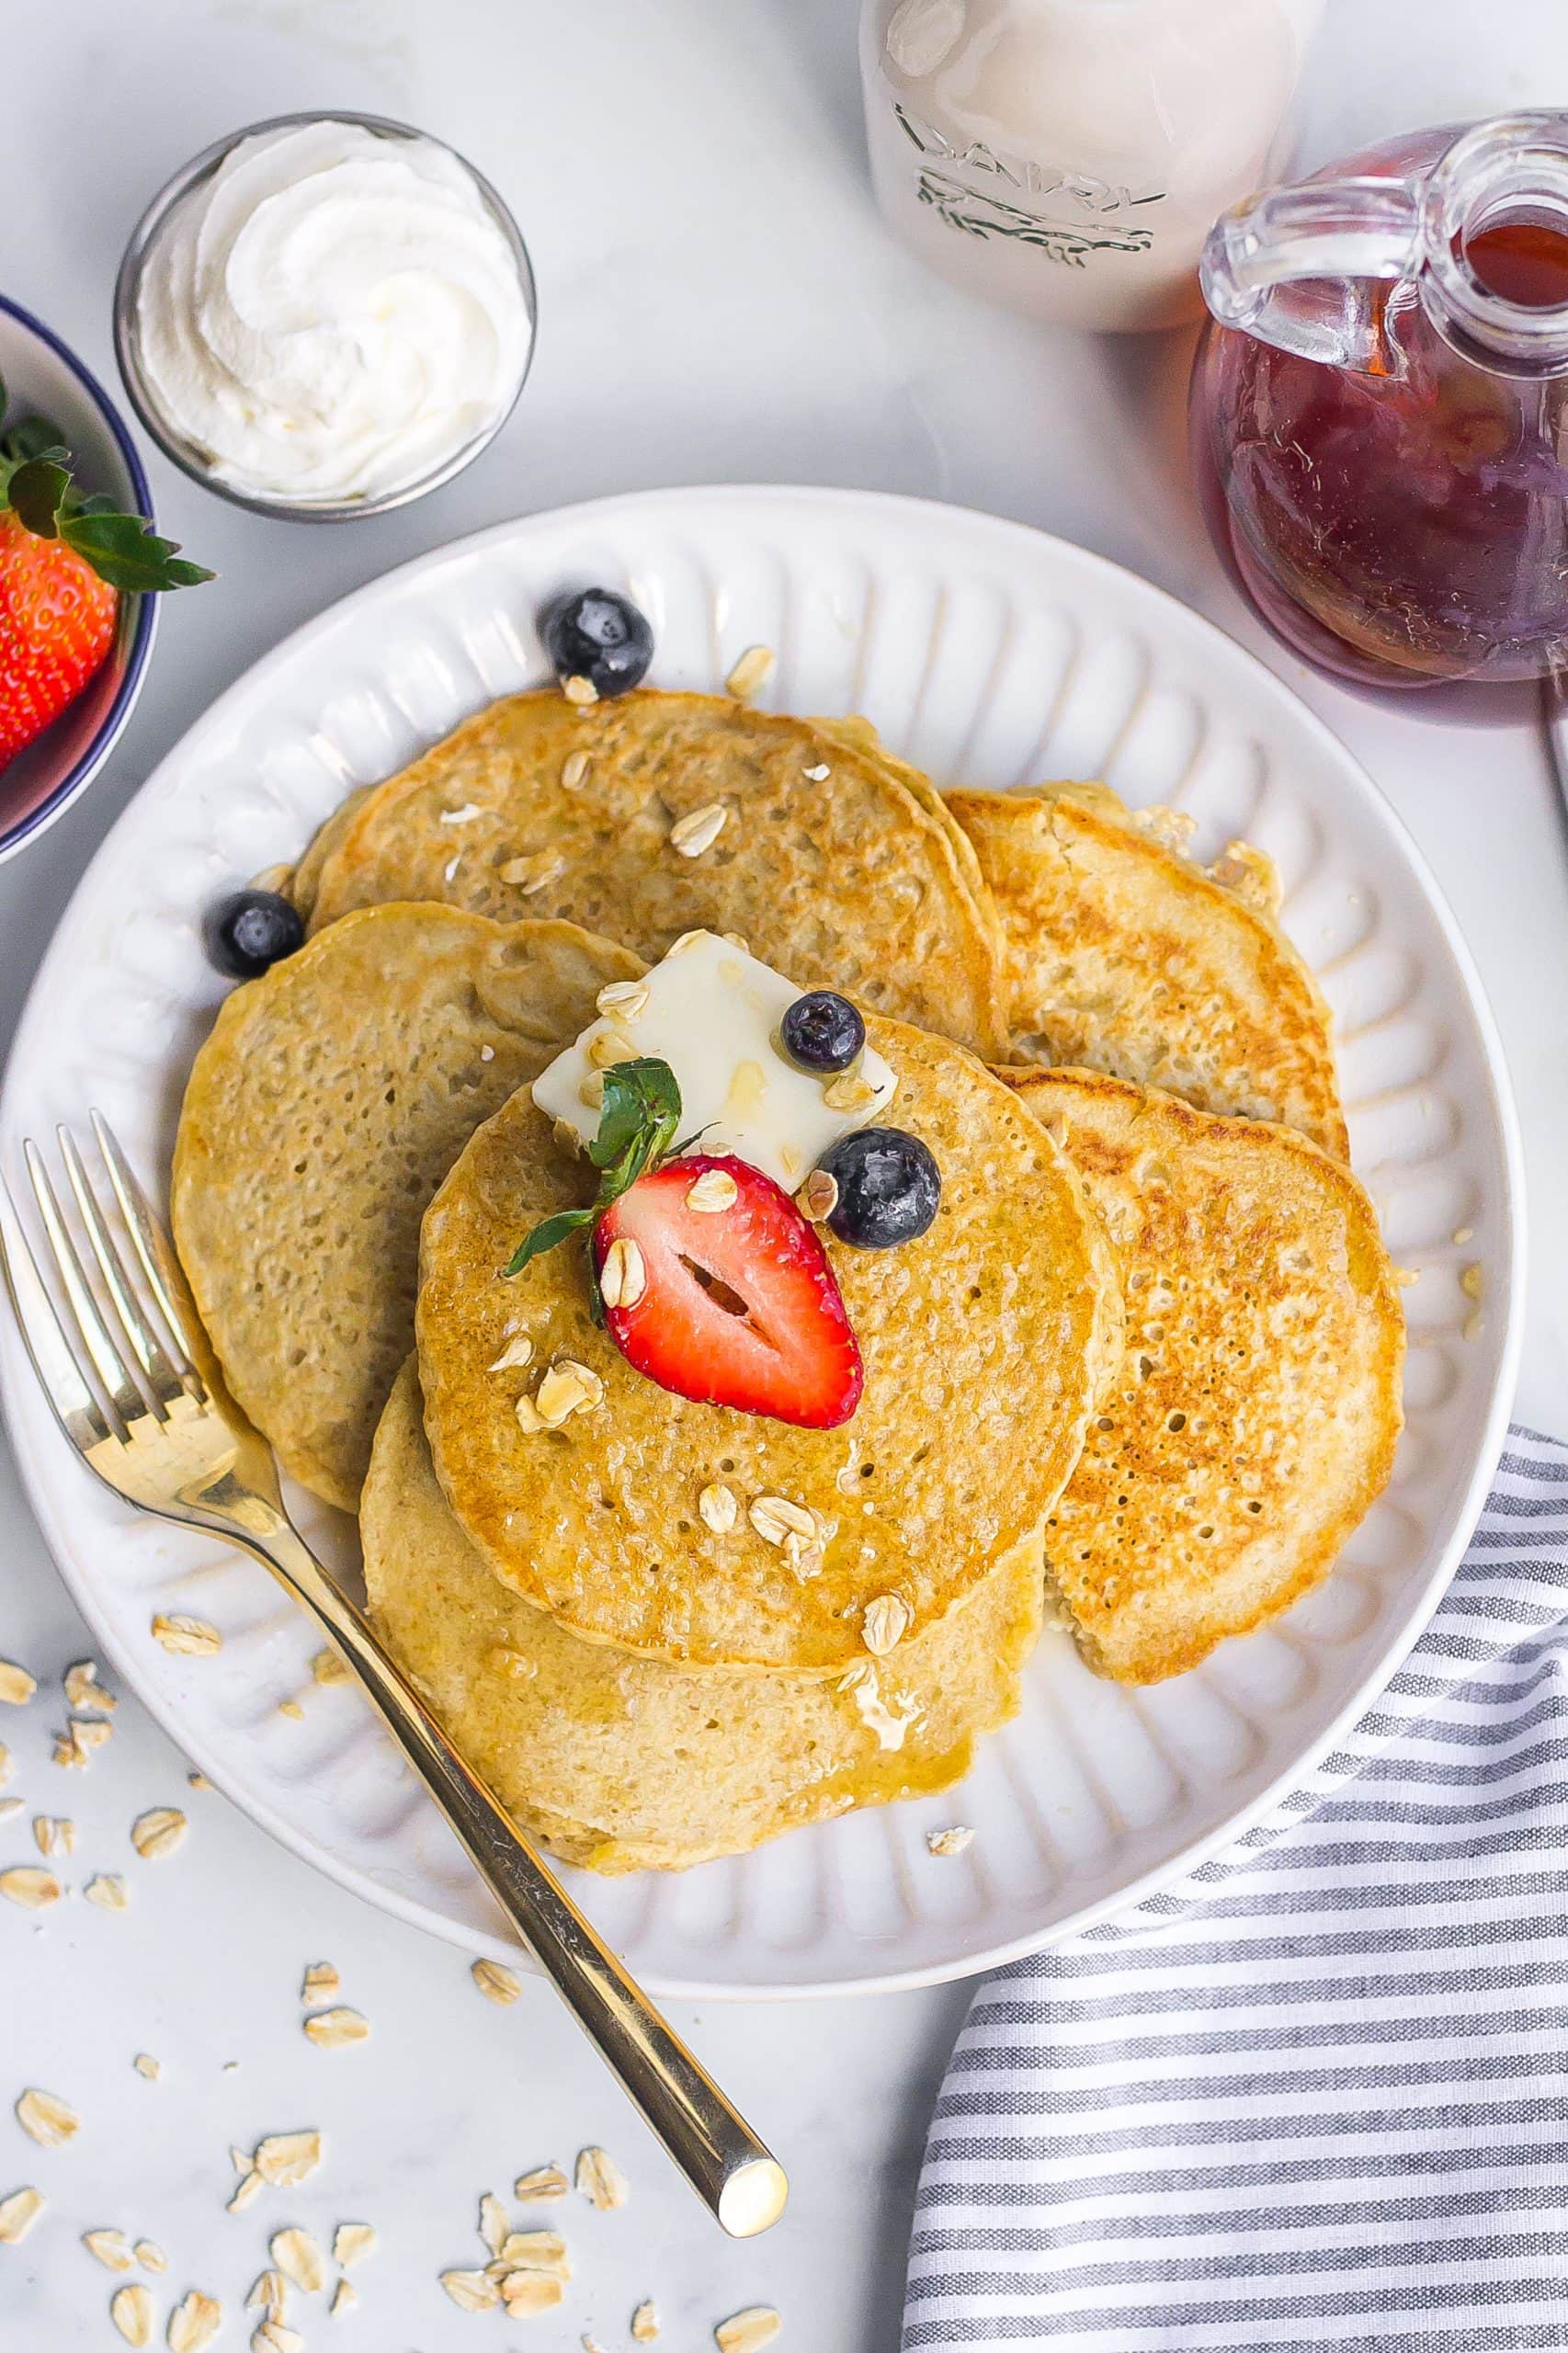 oatmeal pancake recipe with whipped cream, berries, syrup and milk